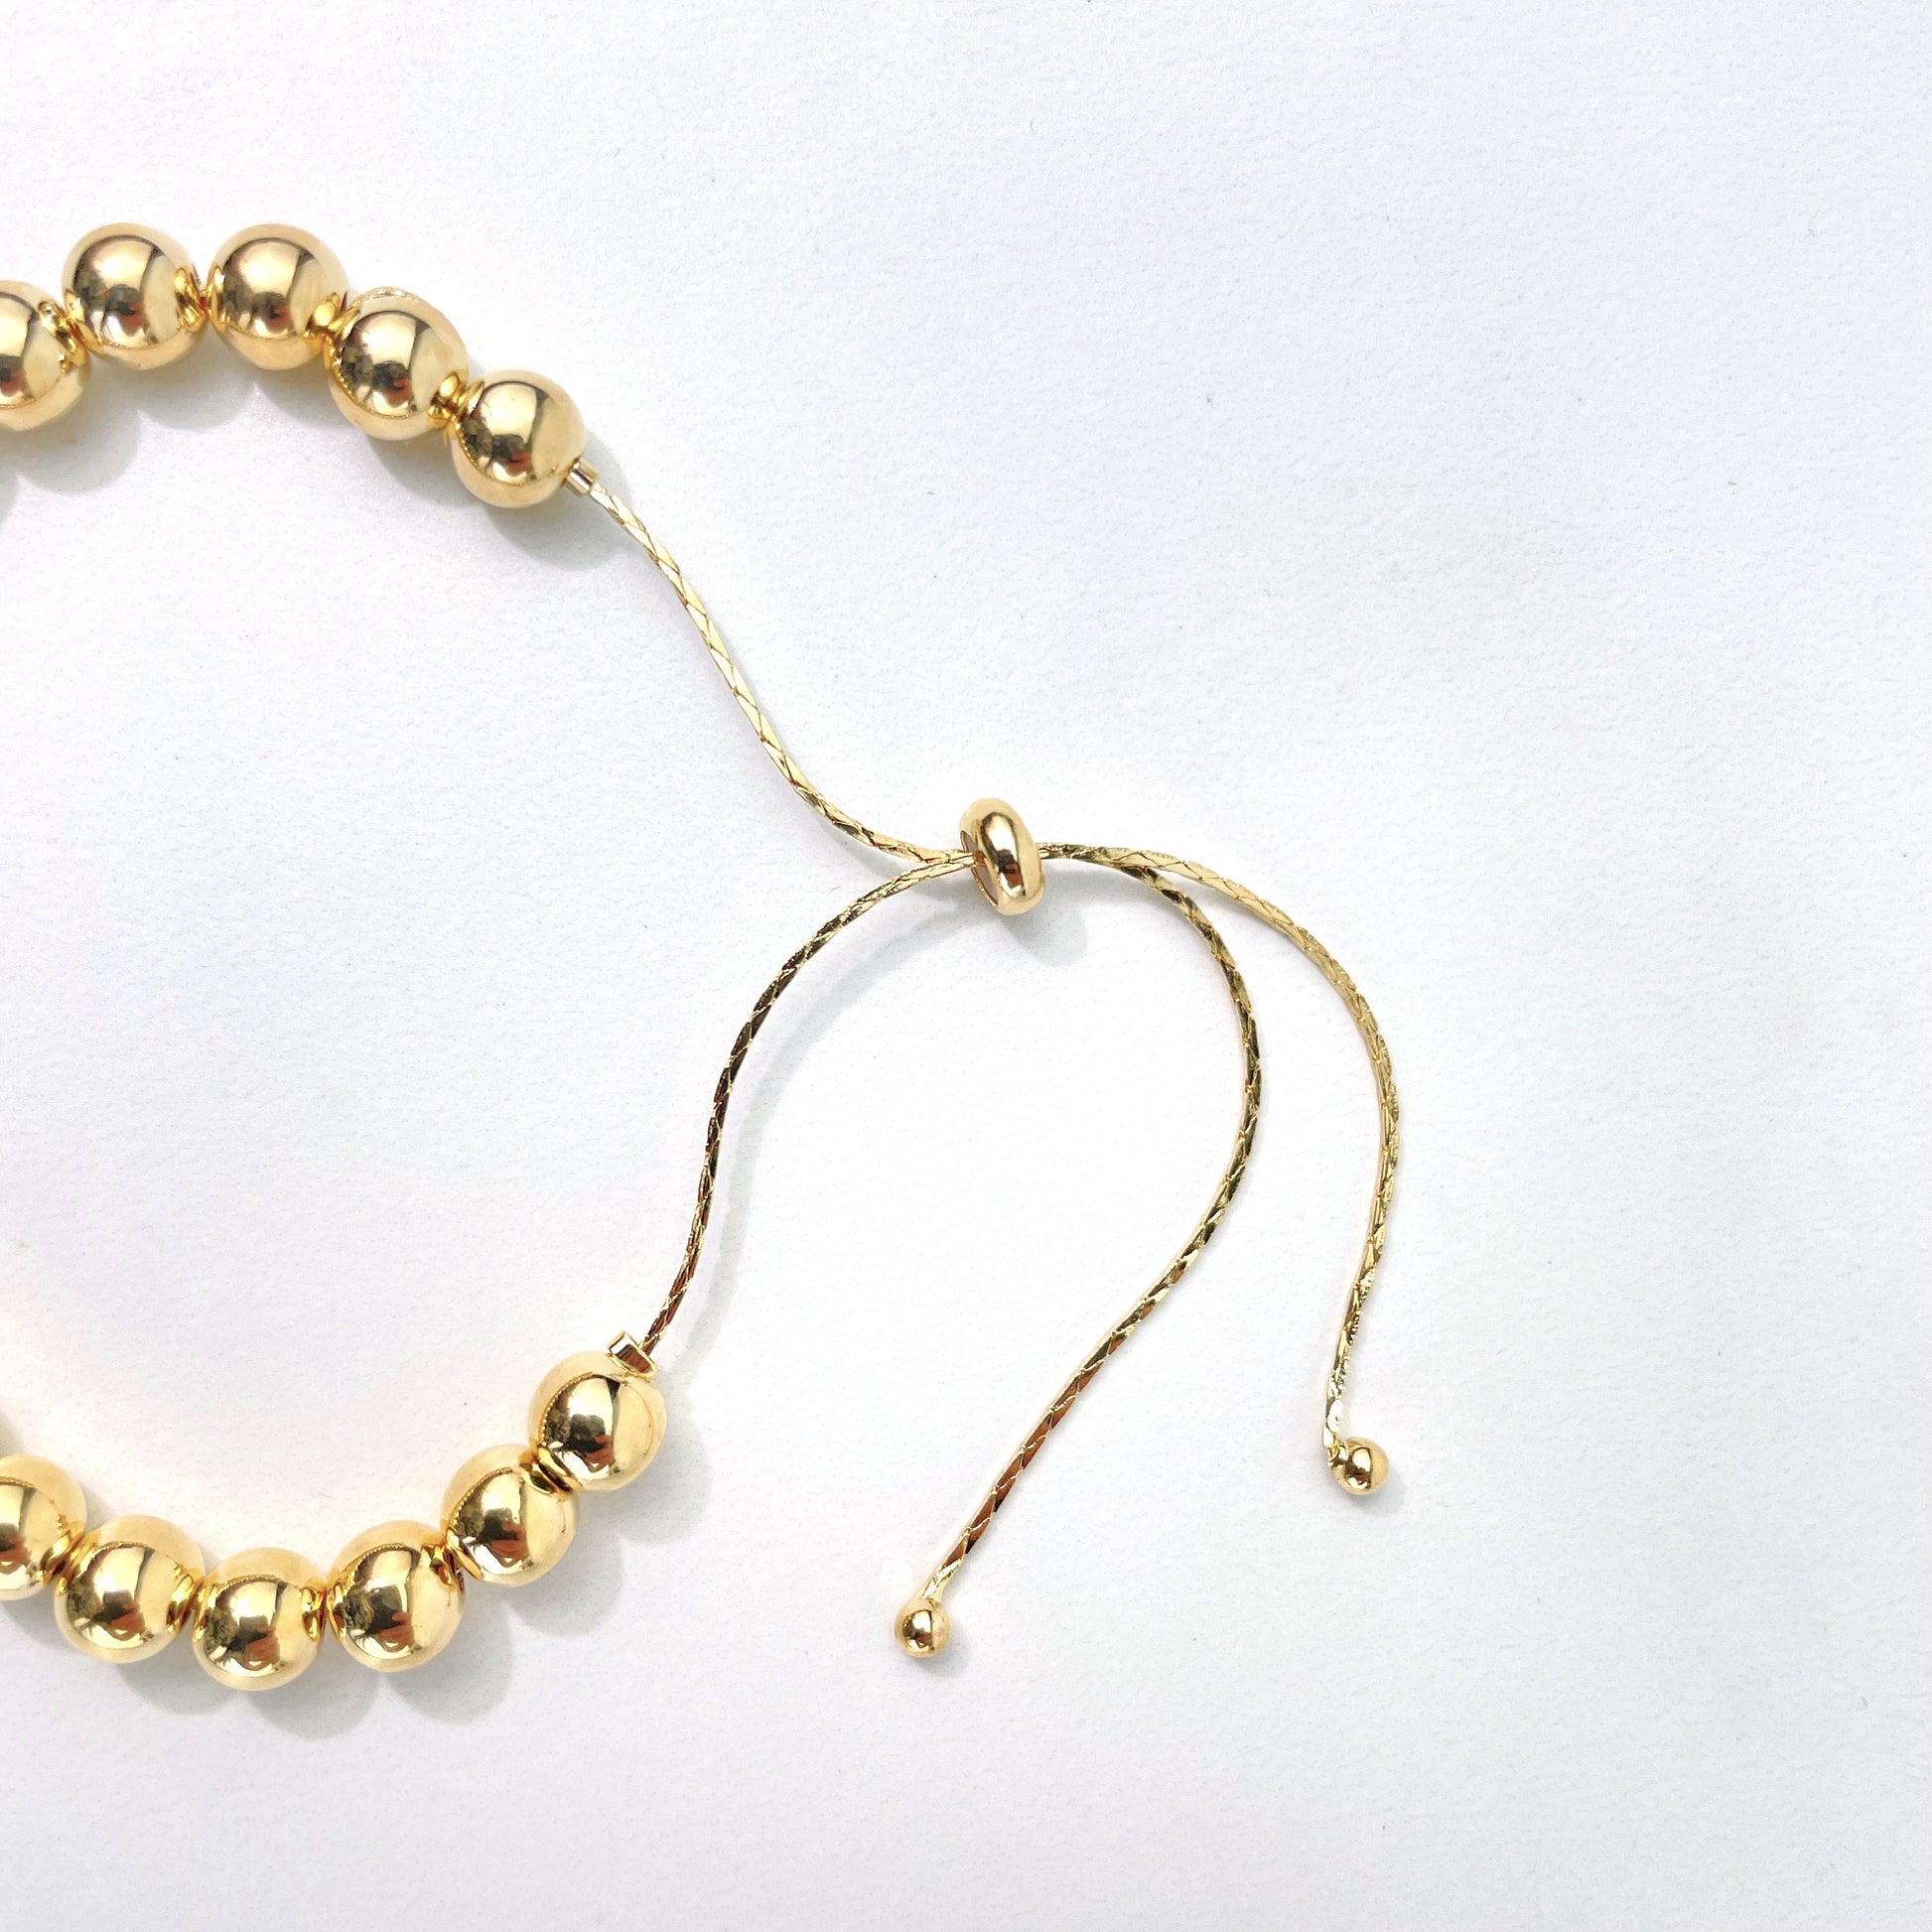 18k Gold Filled 1mm Snake Chain, Beaded Bracelet with Heart Charms, Adjustable Bracelet, Wholesale Jewelry Supplies